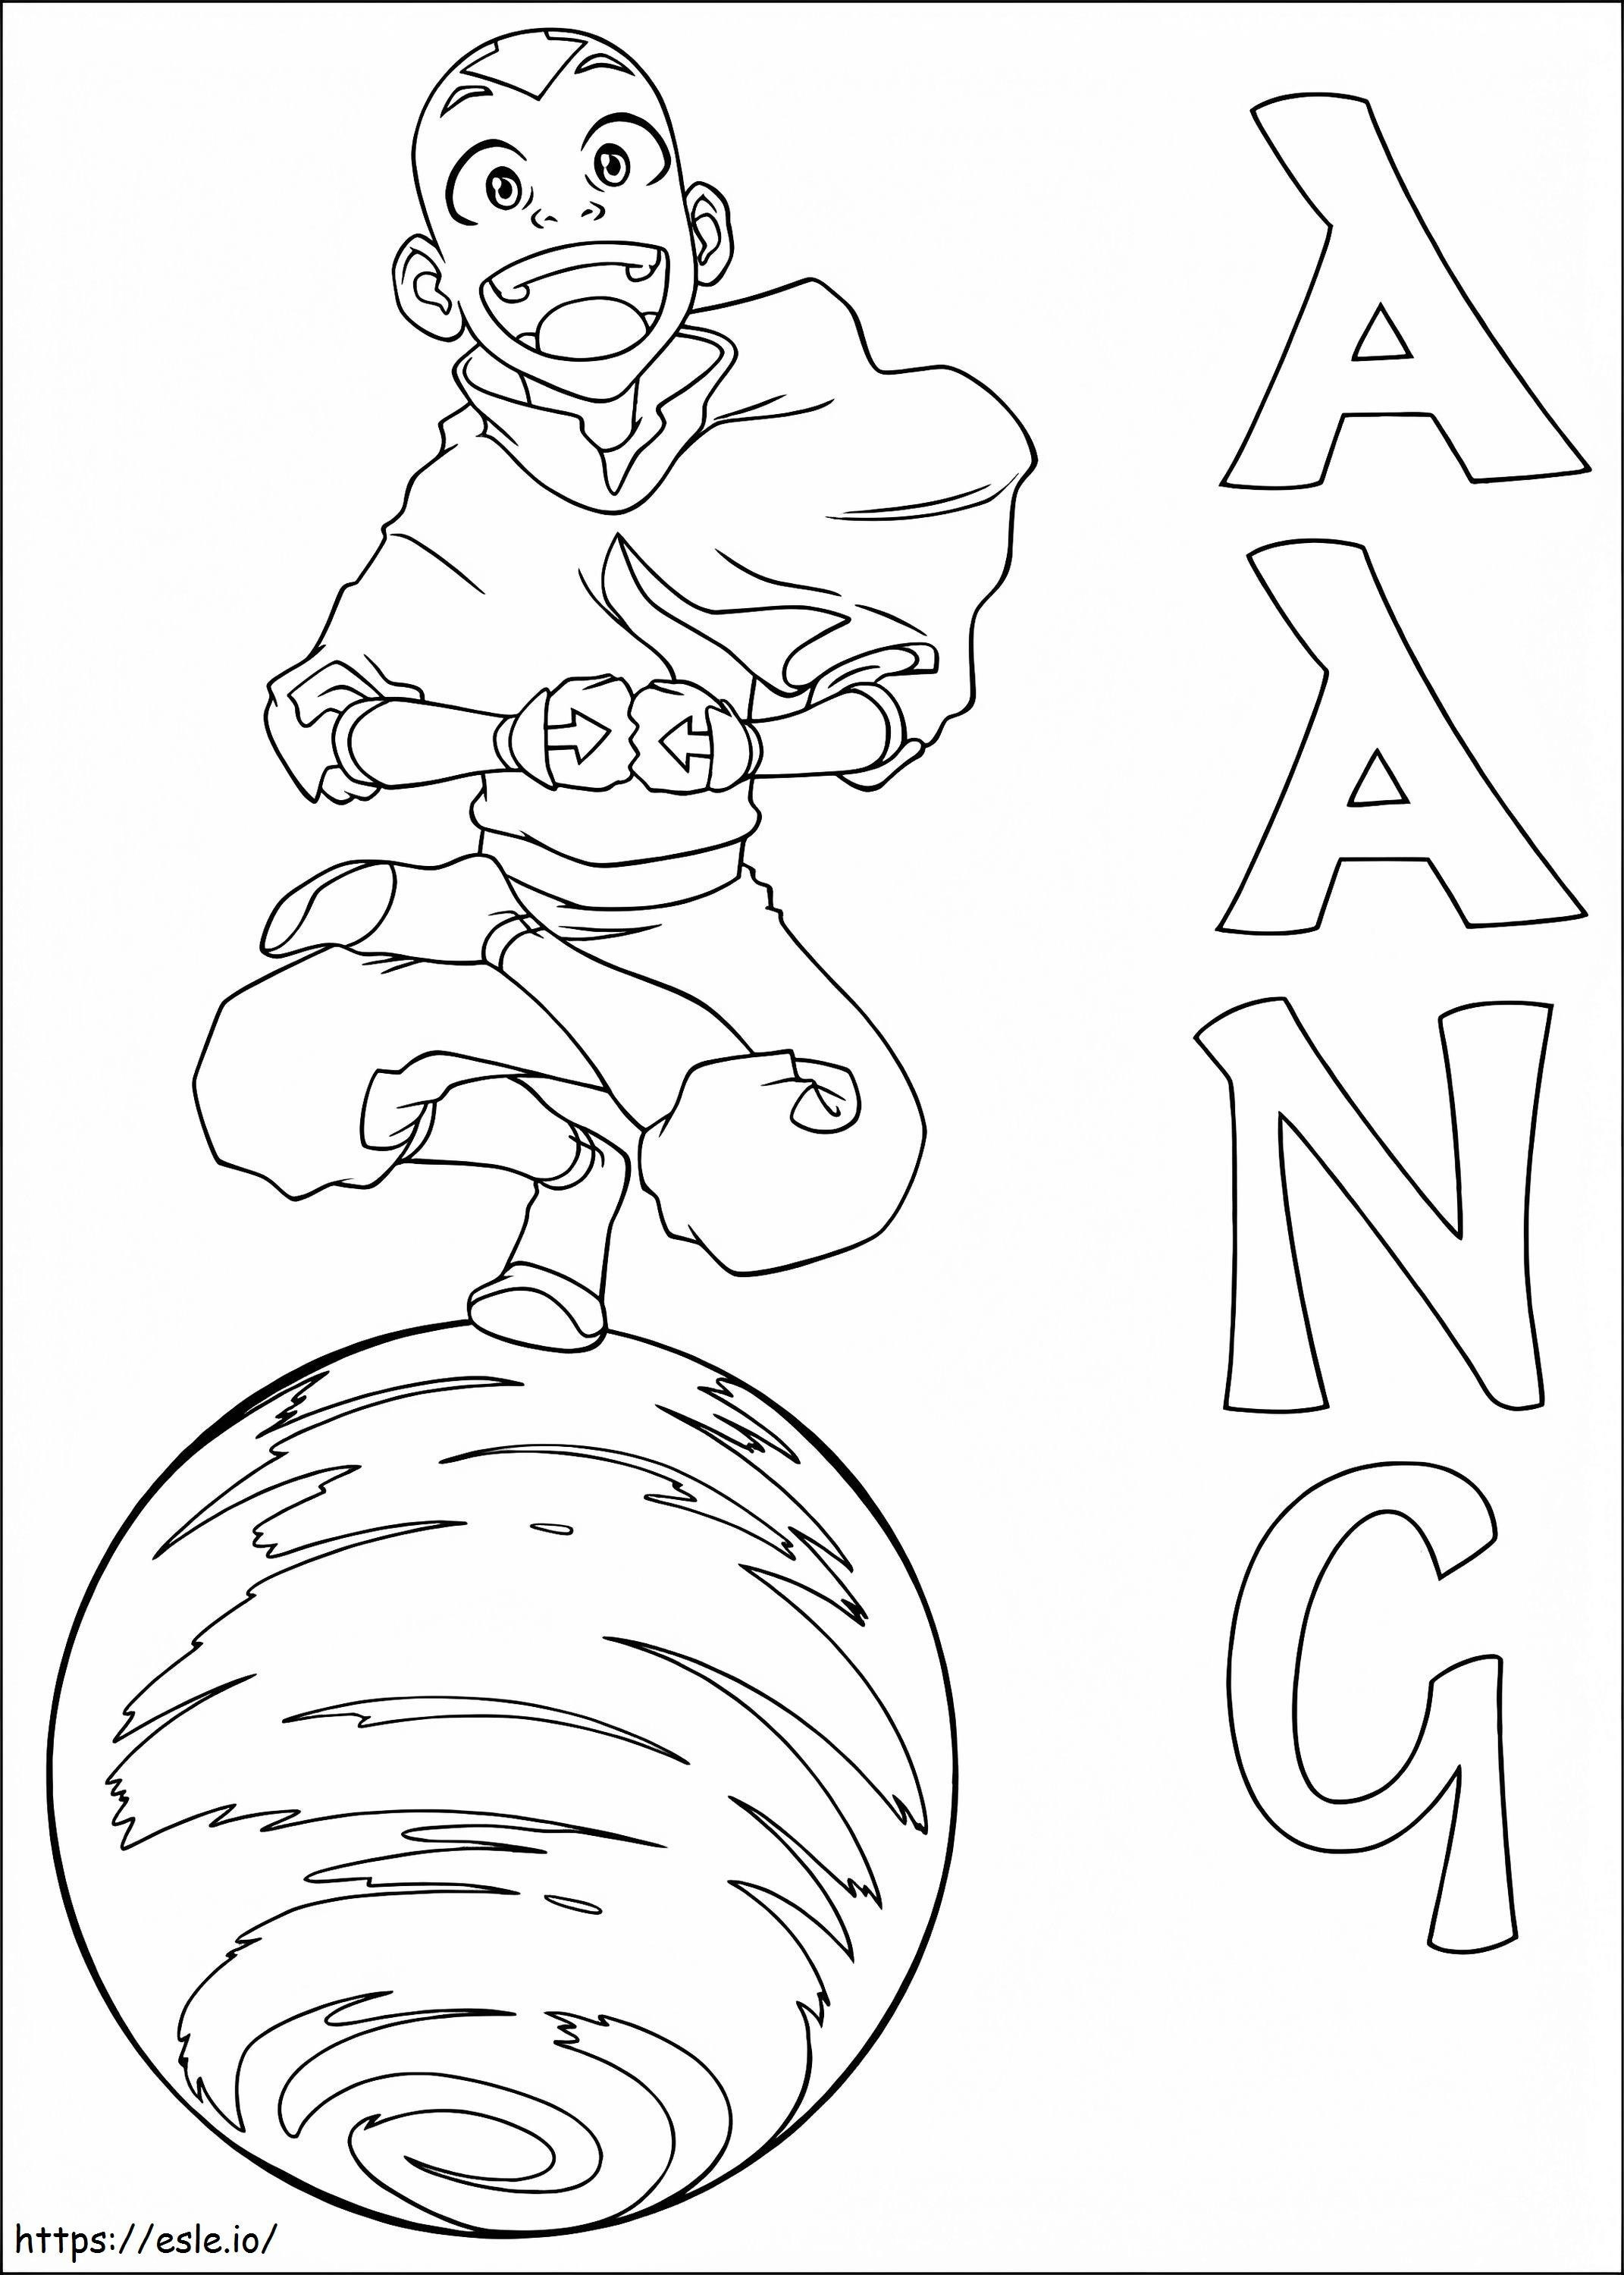 Aang With Earball A4 coloring page